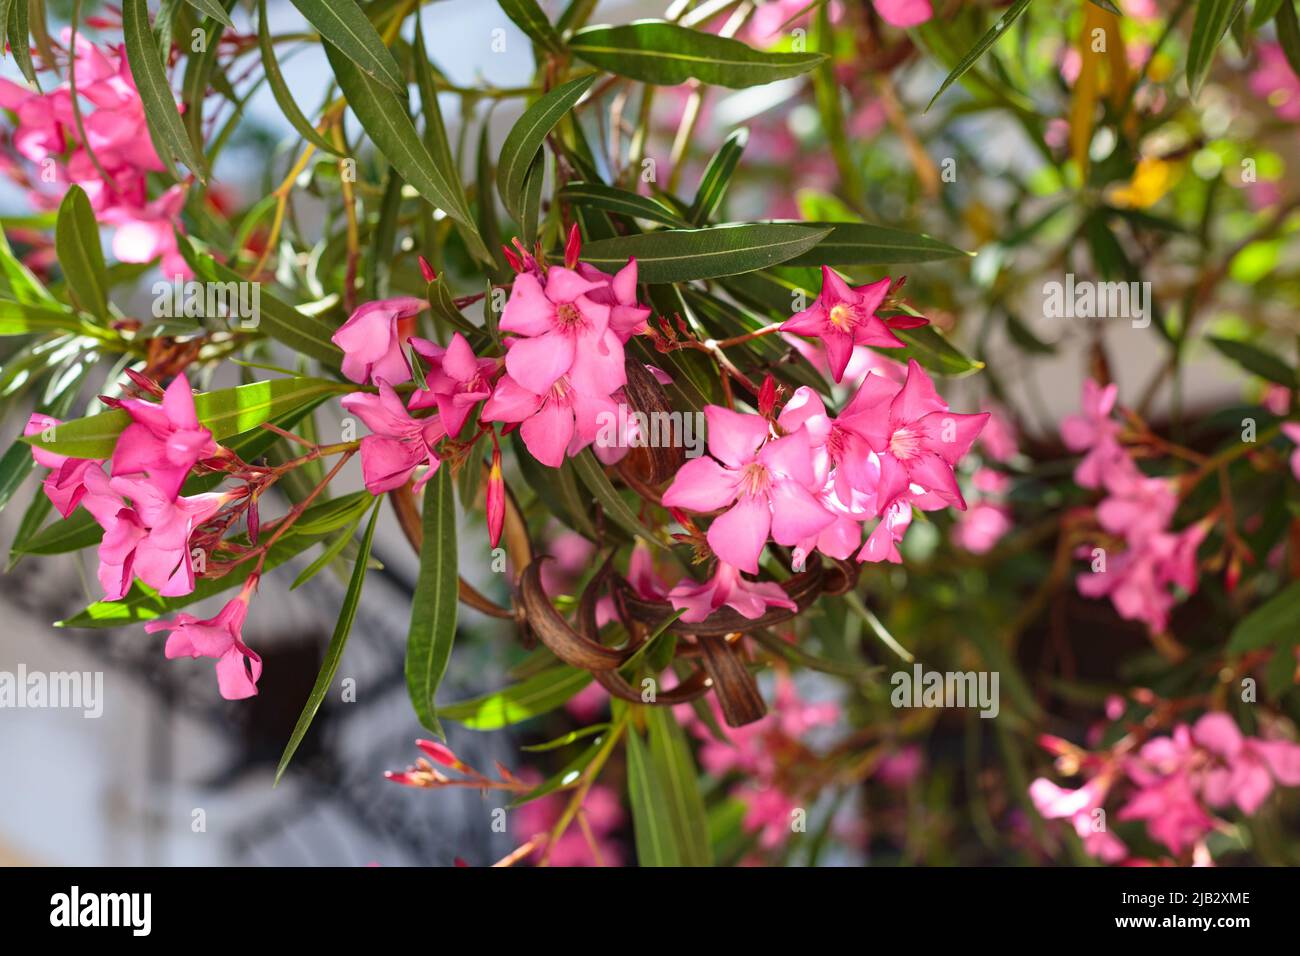 Nerium oleander in bloom, pink flowers and green leaves Stock Photo